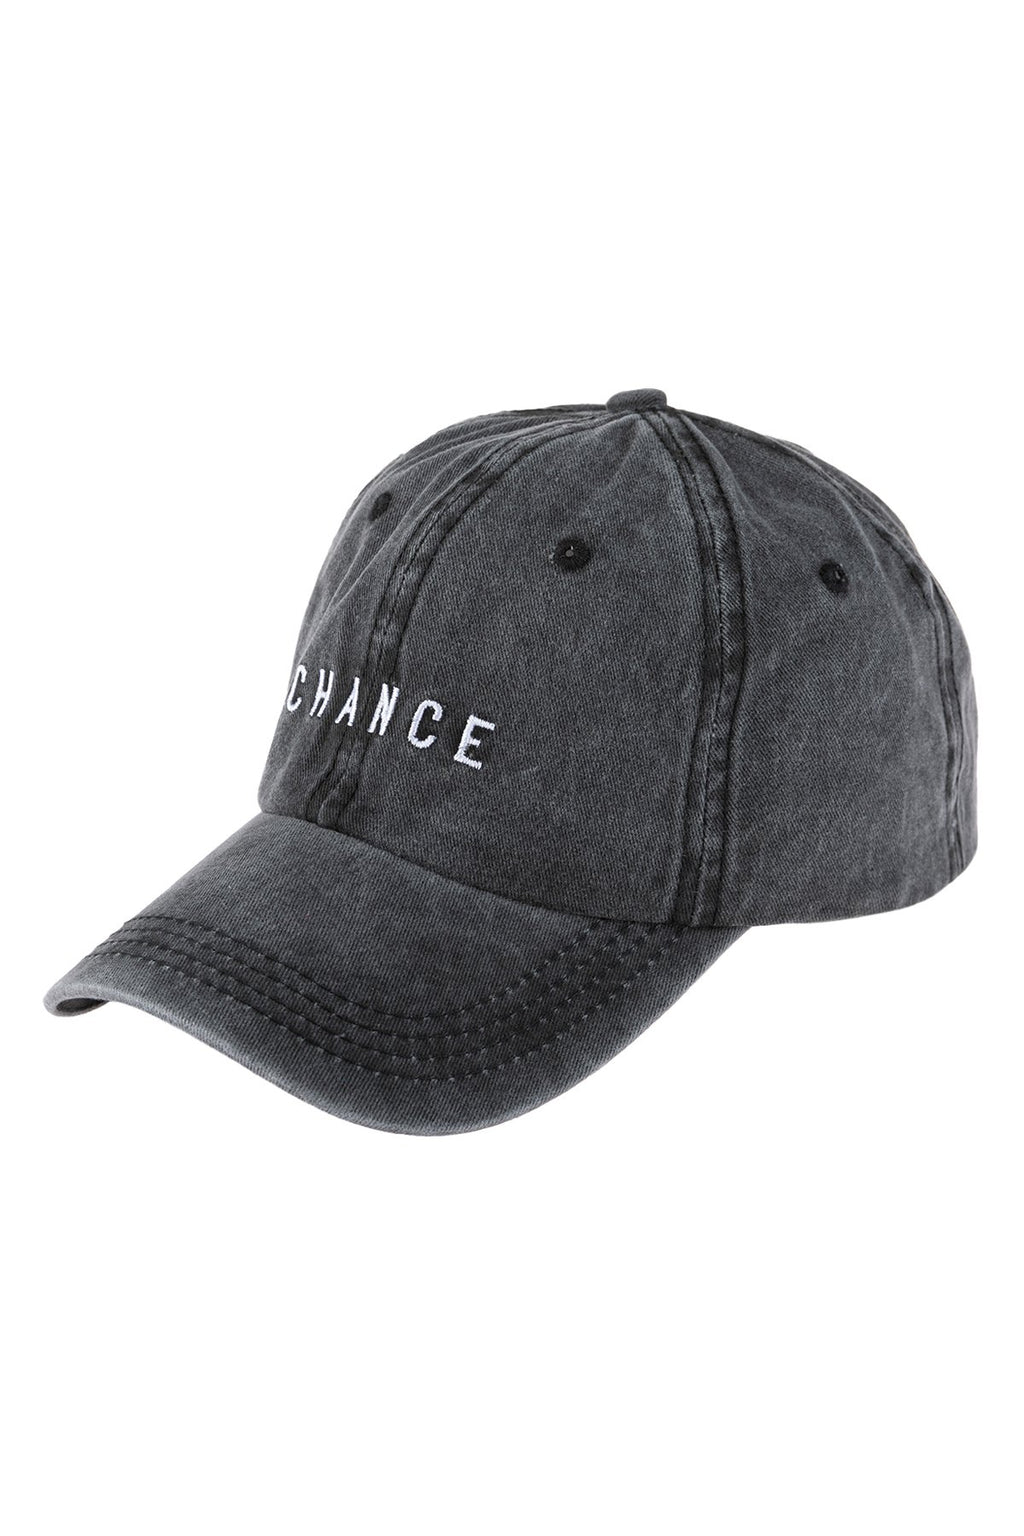 "Chance" Embroidered Acid Washed Cap